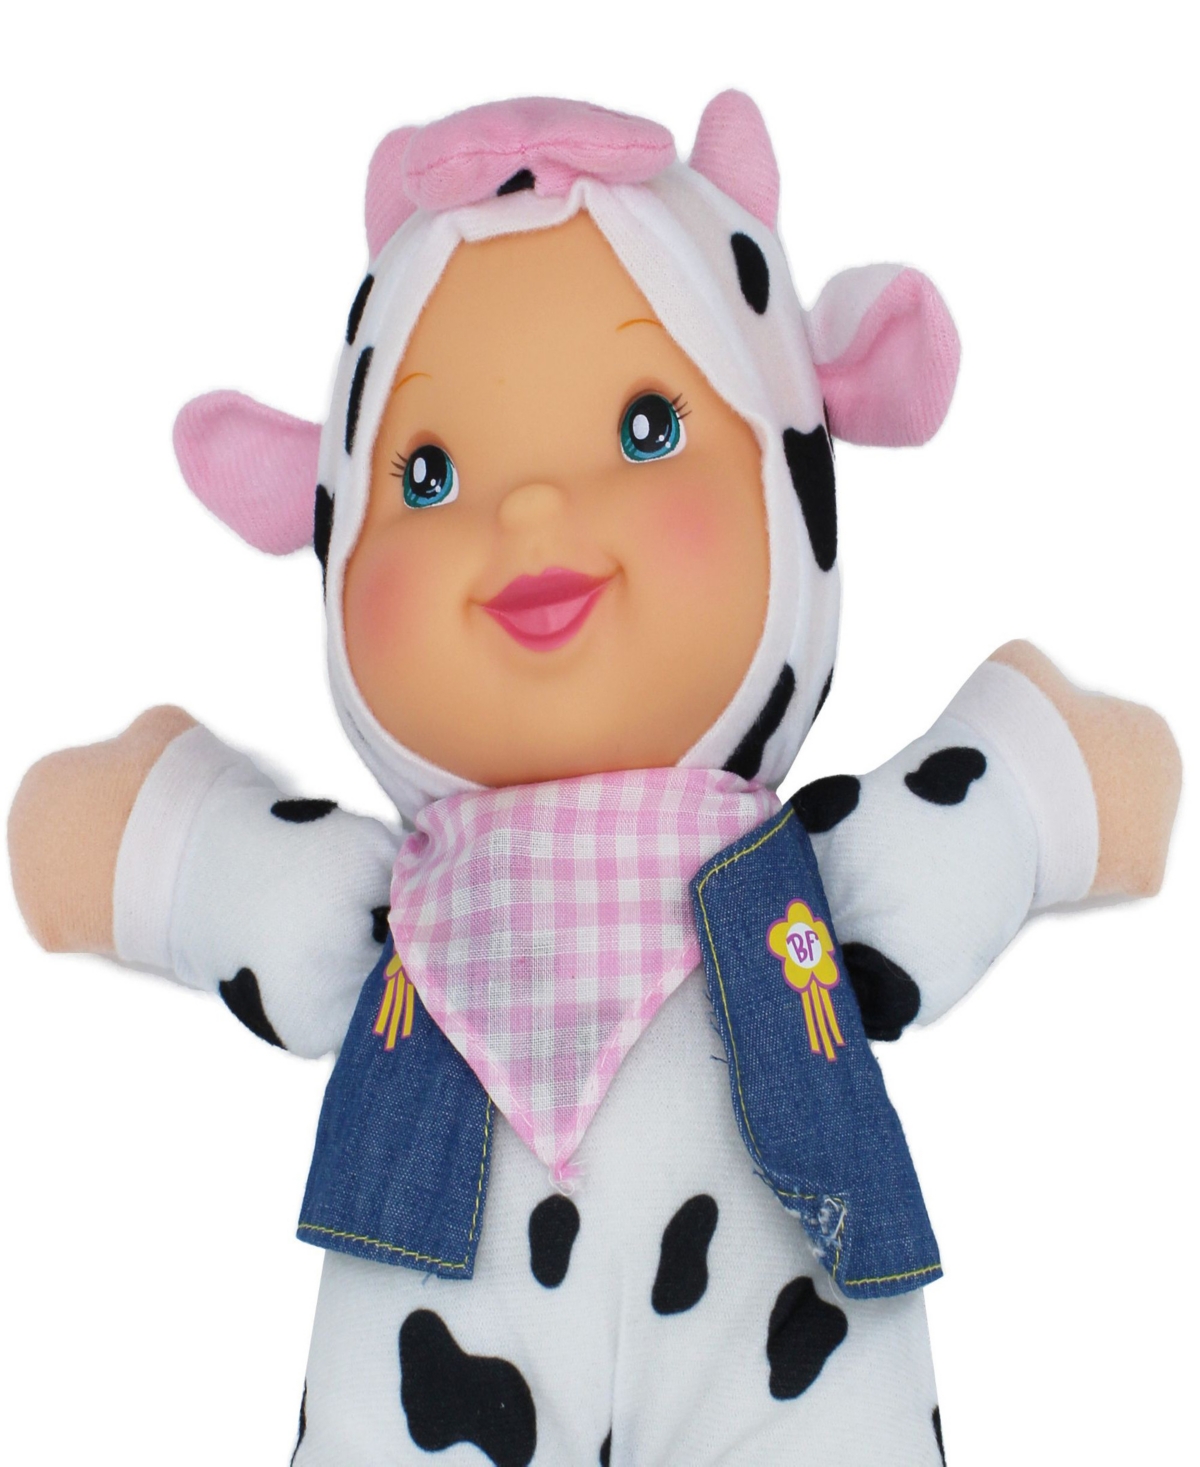 Shop Baby's First By Nemcor Goldberger Doll Farm Animal Friends Cow Bi-lingual English And Spanish In Multi